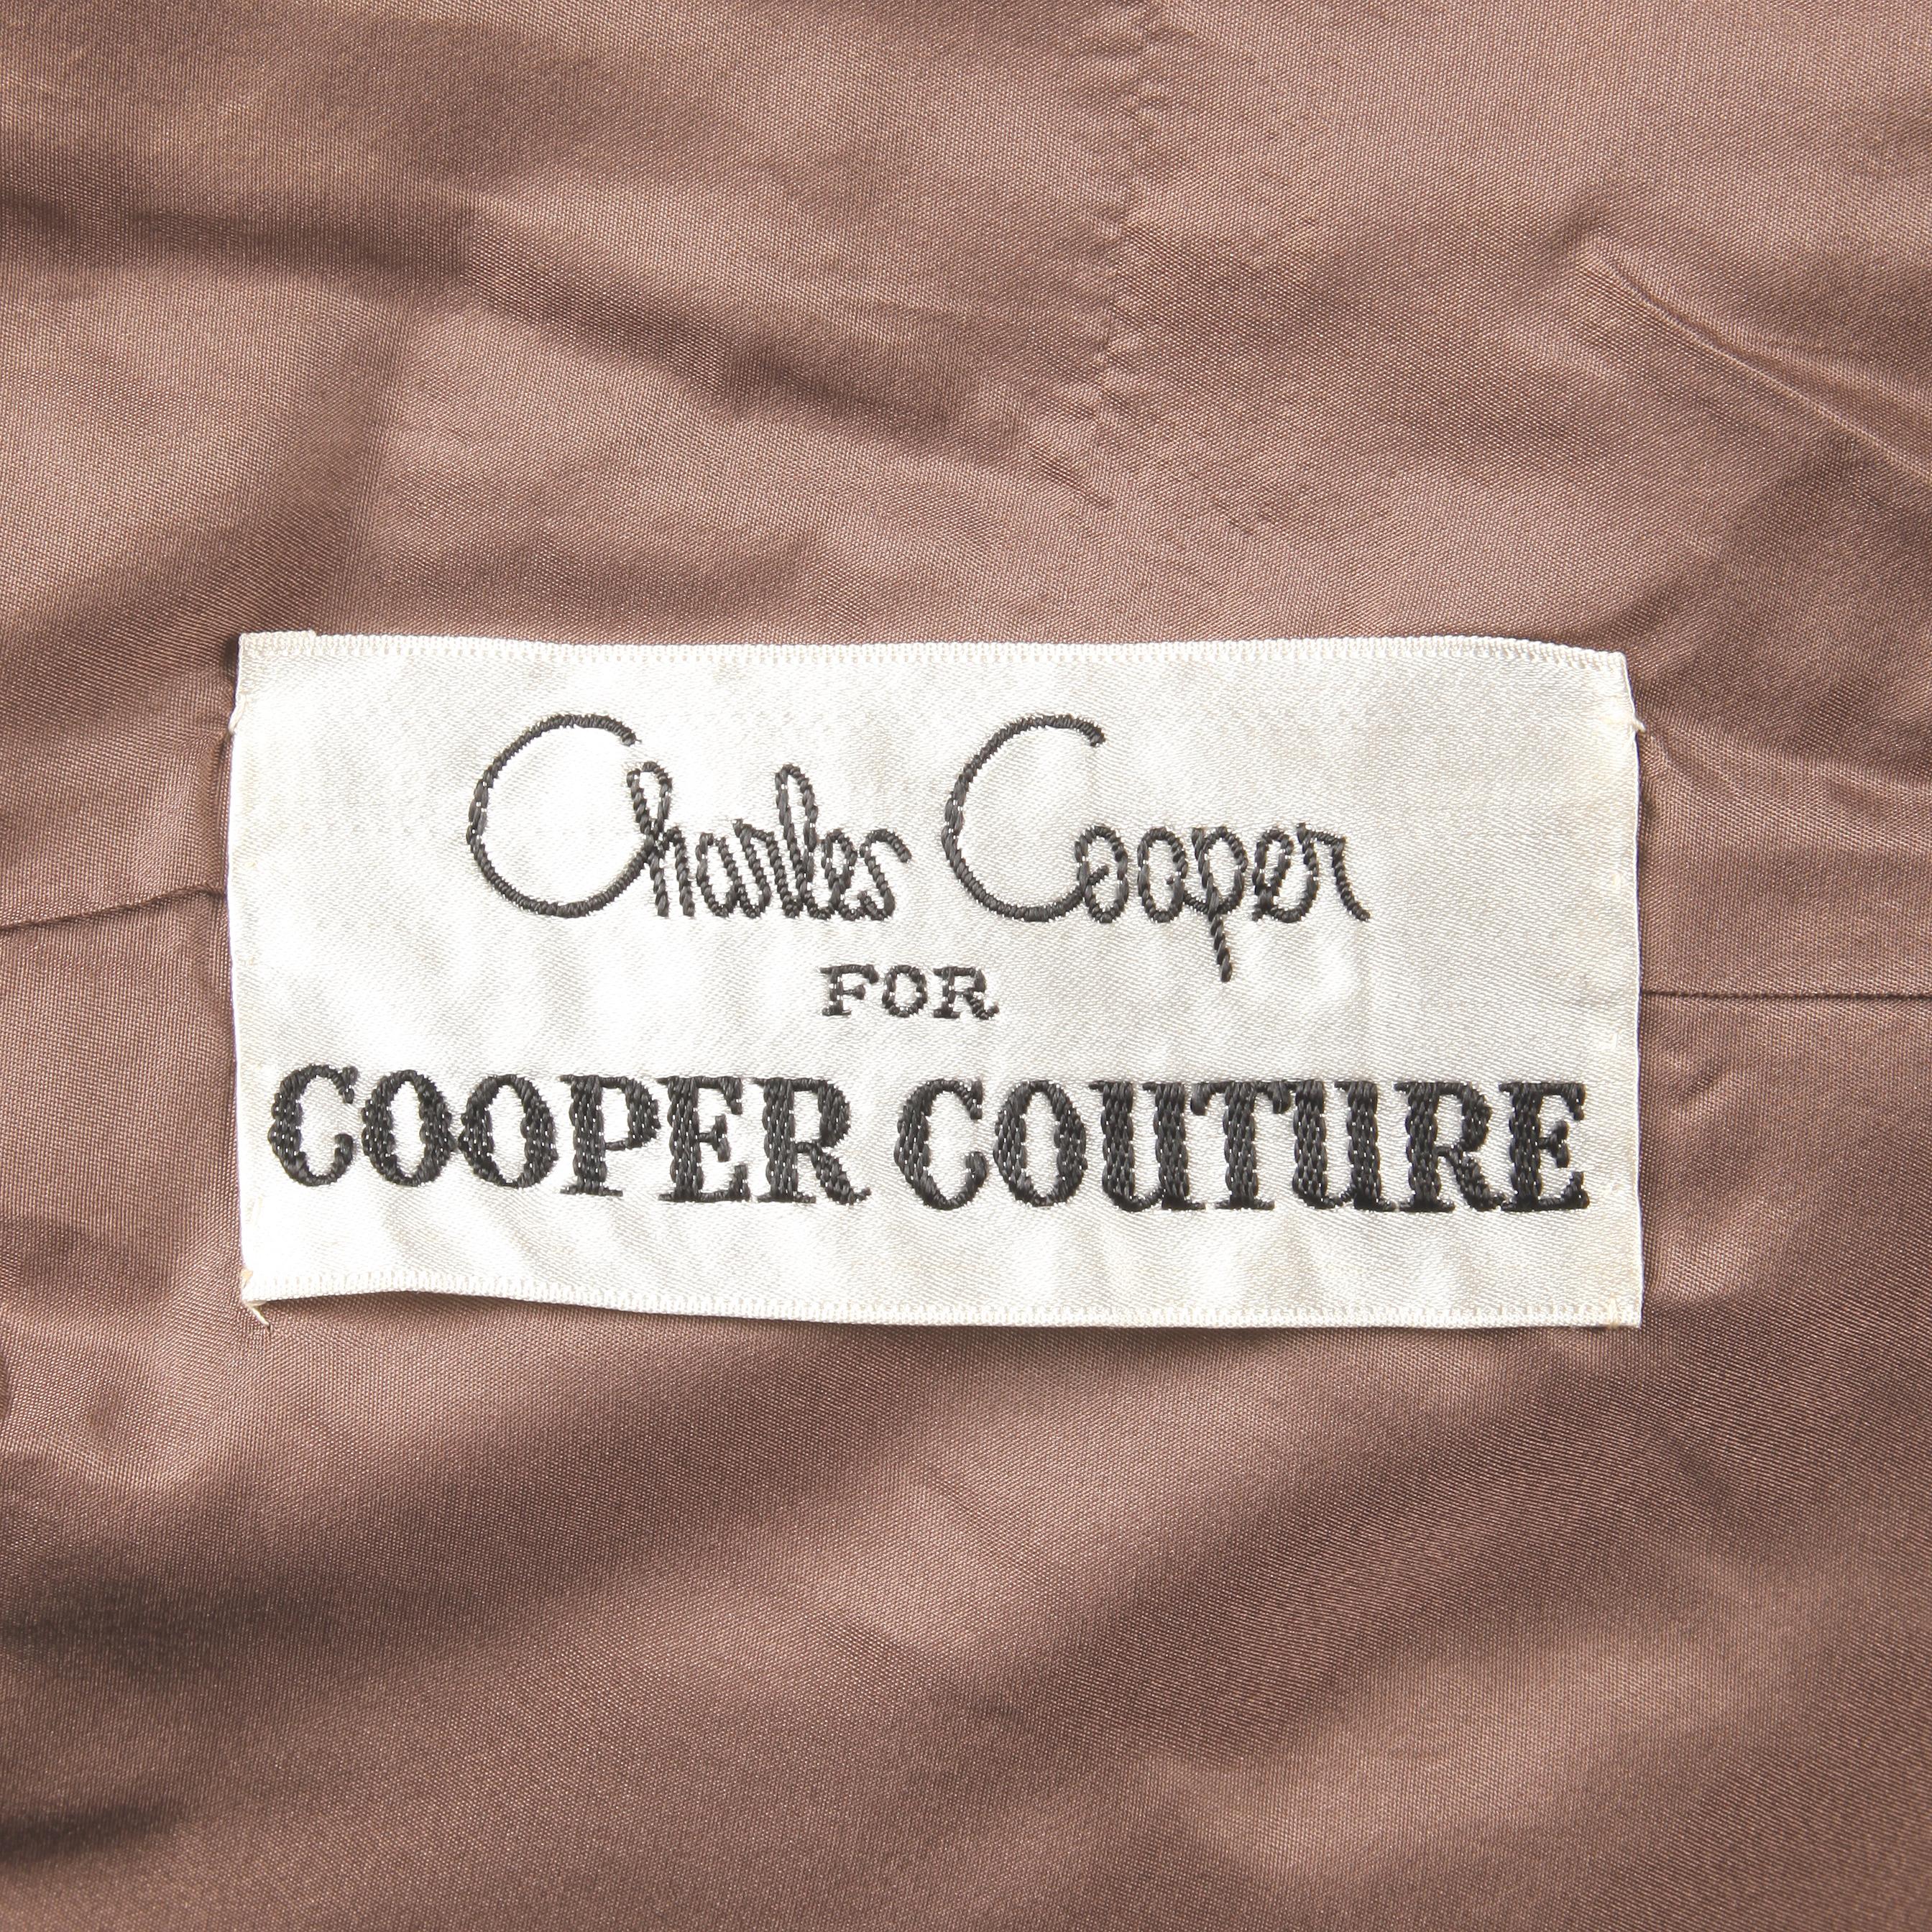 Gorgeous brown velvet vintage 1960s coat by Charles Cooper for Cooper Couture at Nan Duskin. Fully lined with front cabachon button closure. Side pockets. Fits like a modern size large. The bust measures 46